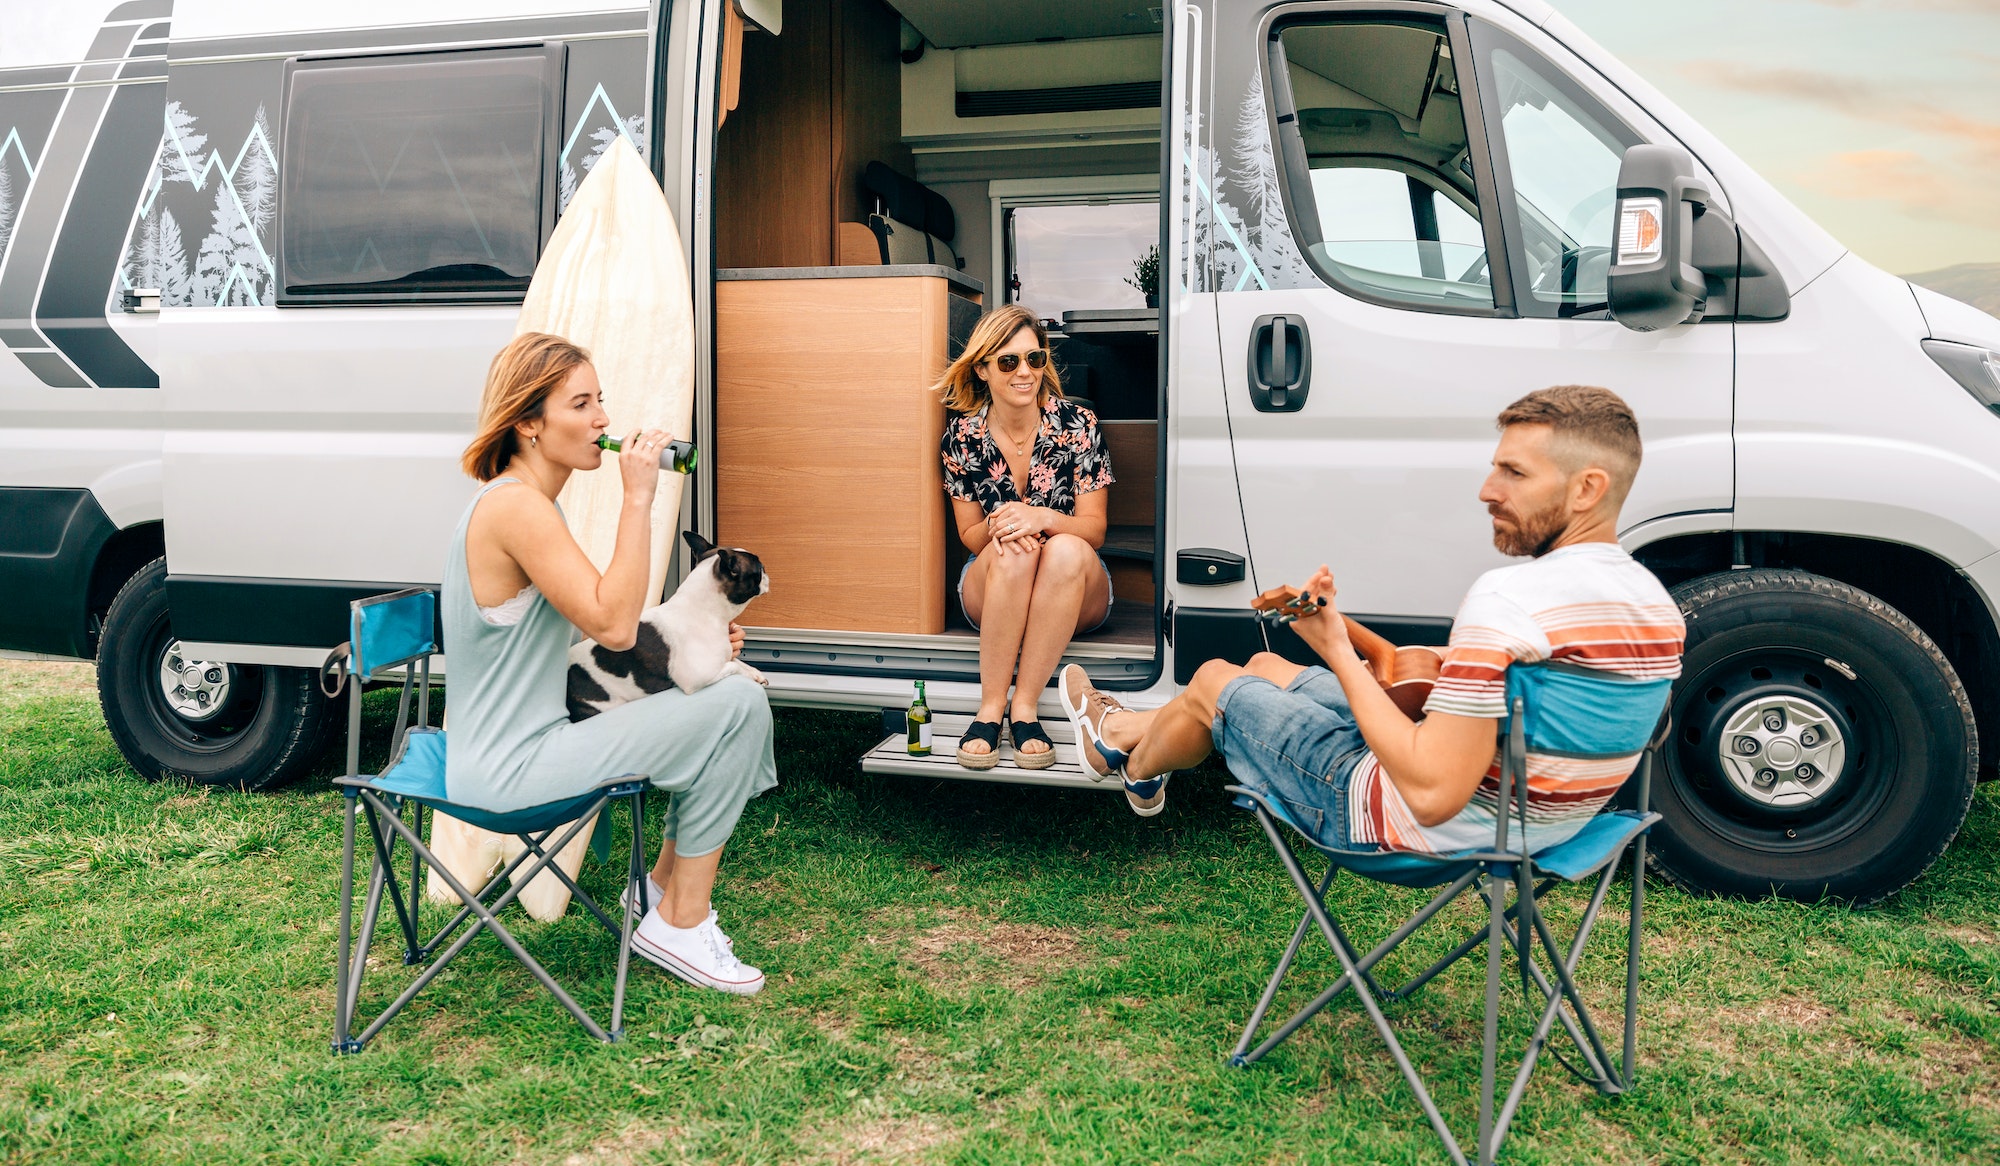 Friends with their dog drinking beer in front of their camper van